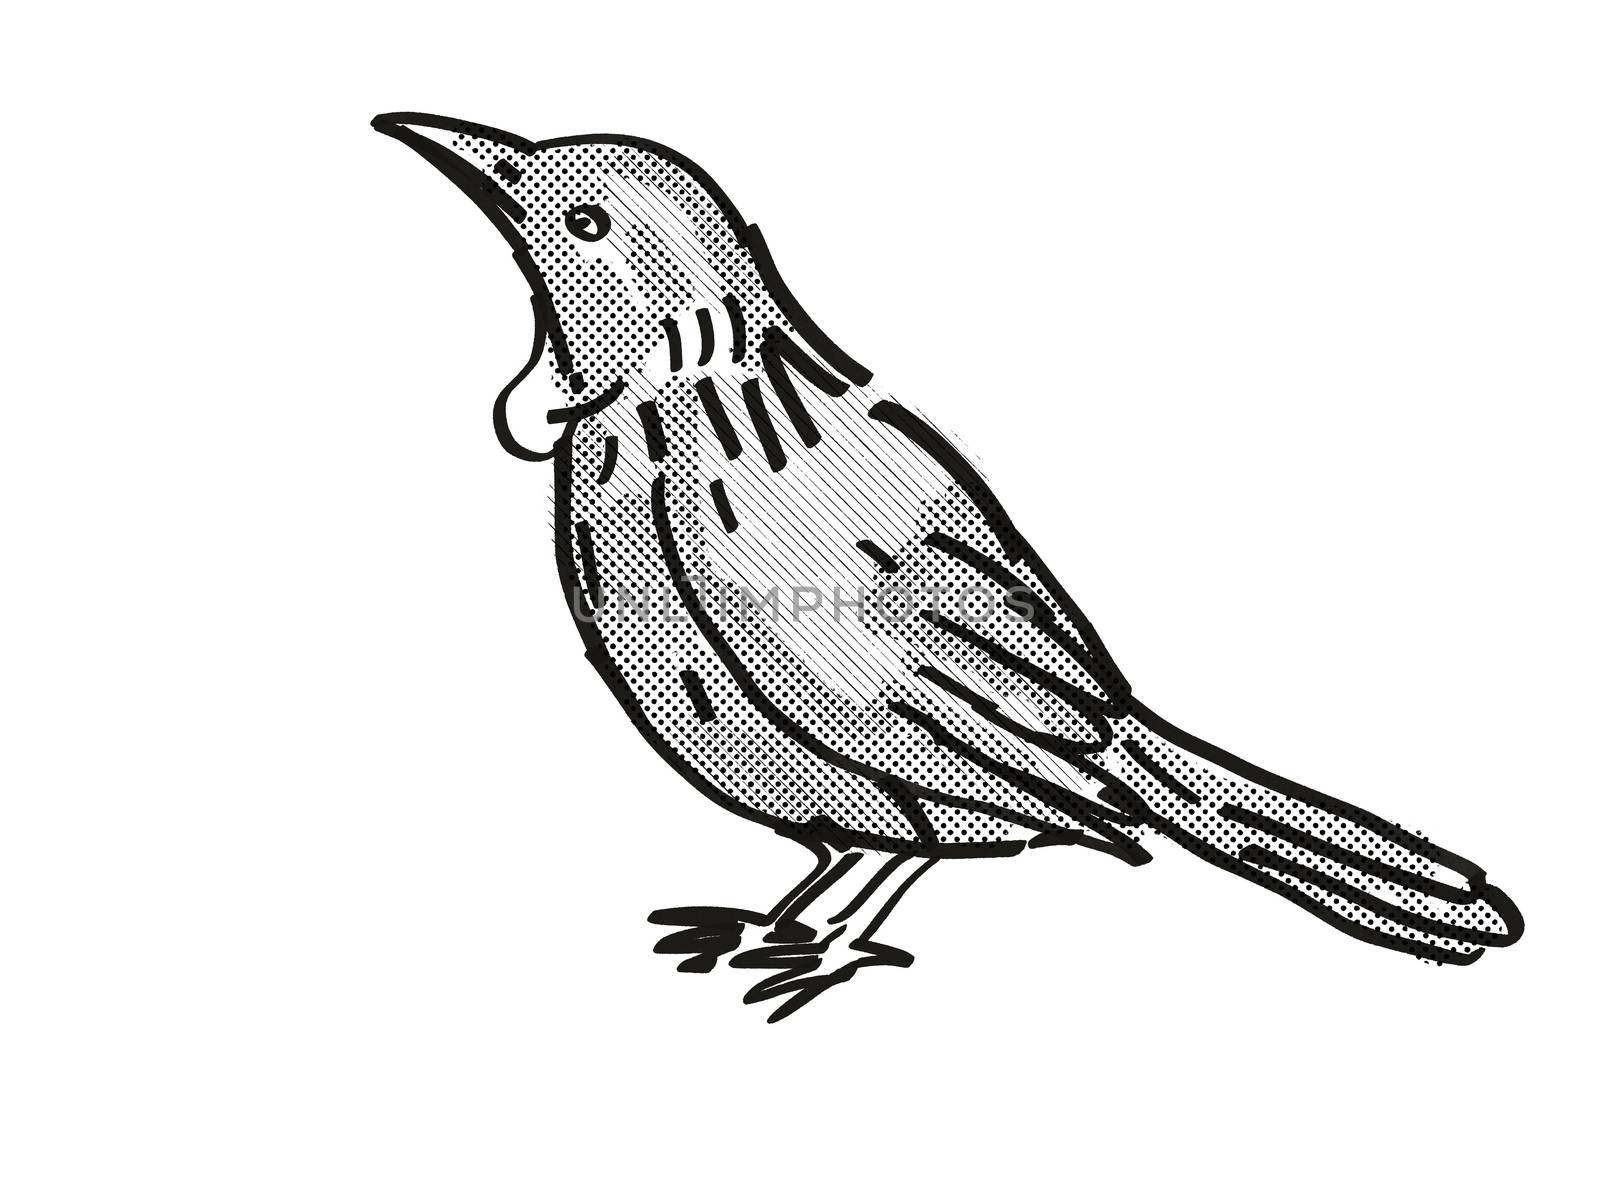 Retro cartoon style drawing of a Tui, a New Zealand bird on isolated white background done in black and white